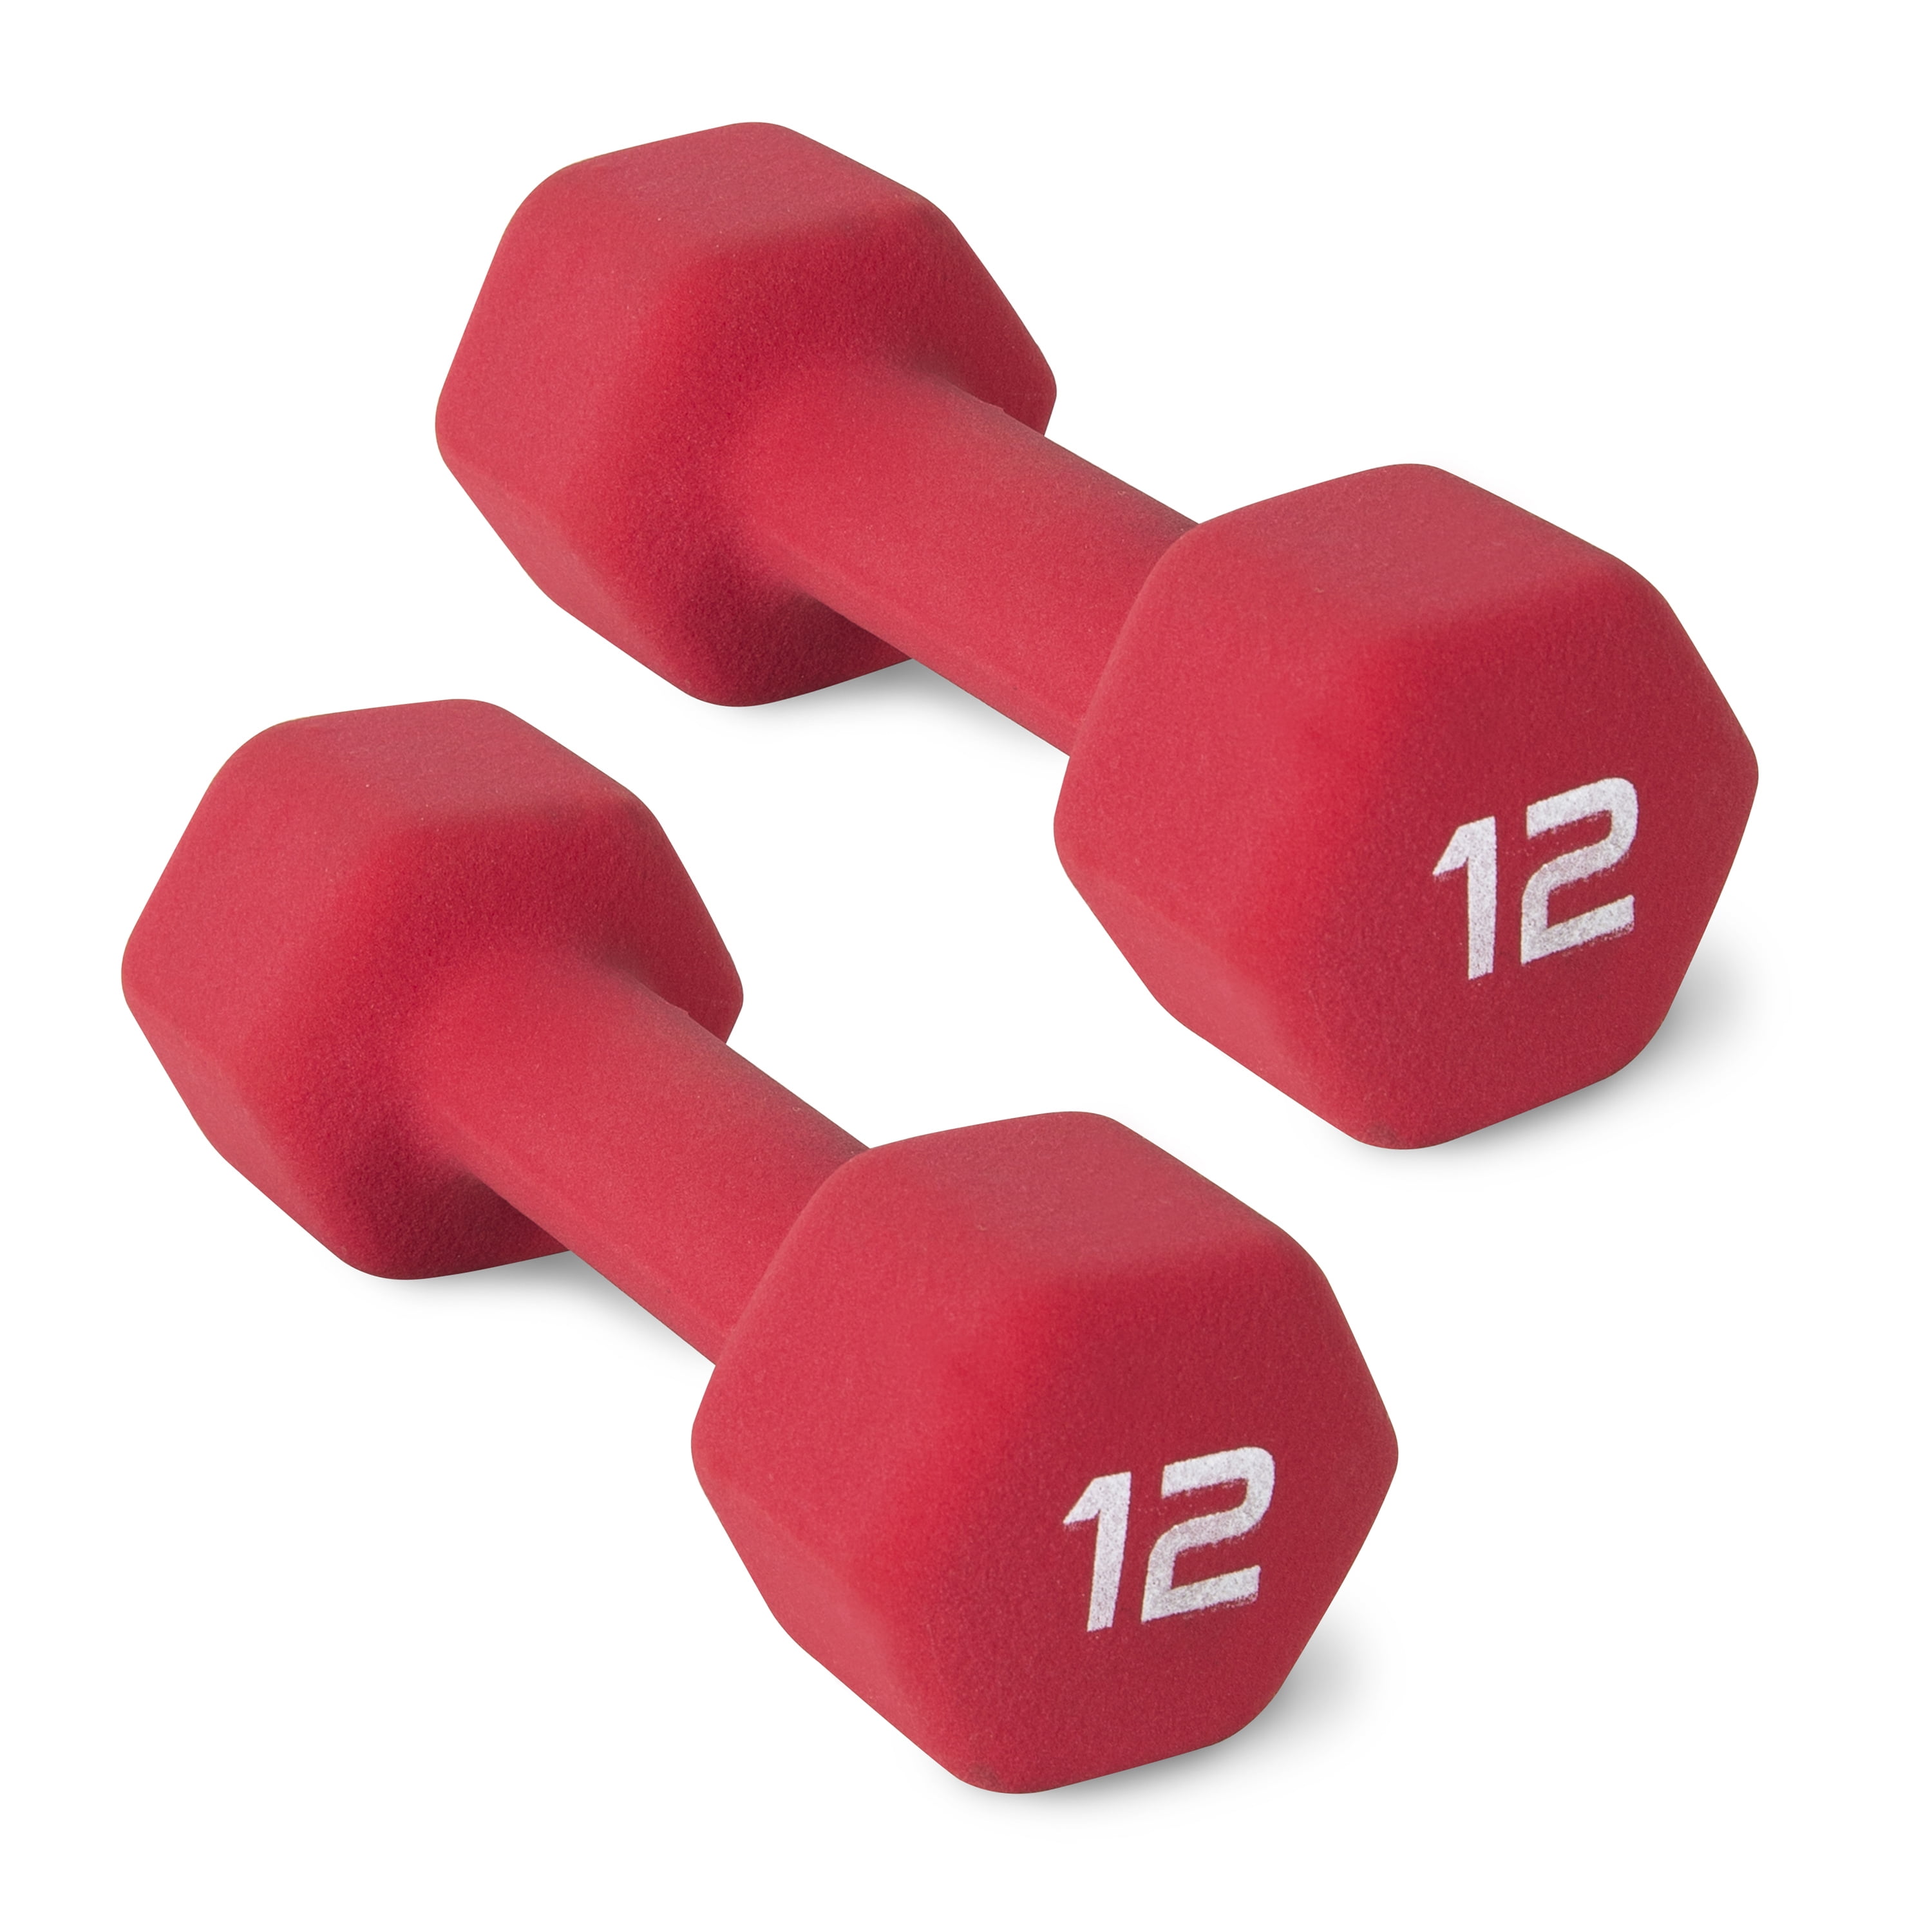 CAP Pair of 12 Lb Pound Dumbbells 24 Lb Red Neoprene Coated HEX *FAST SHIPPING* 